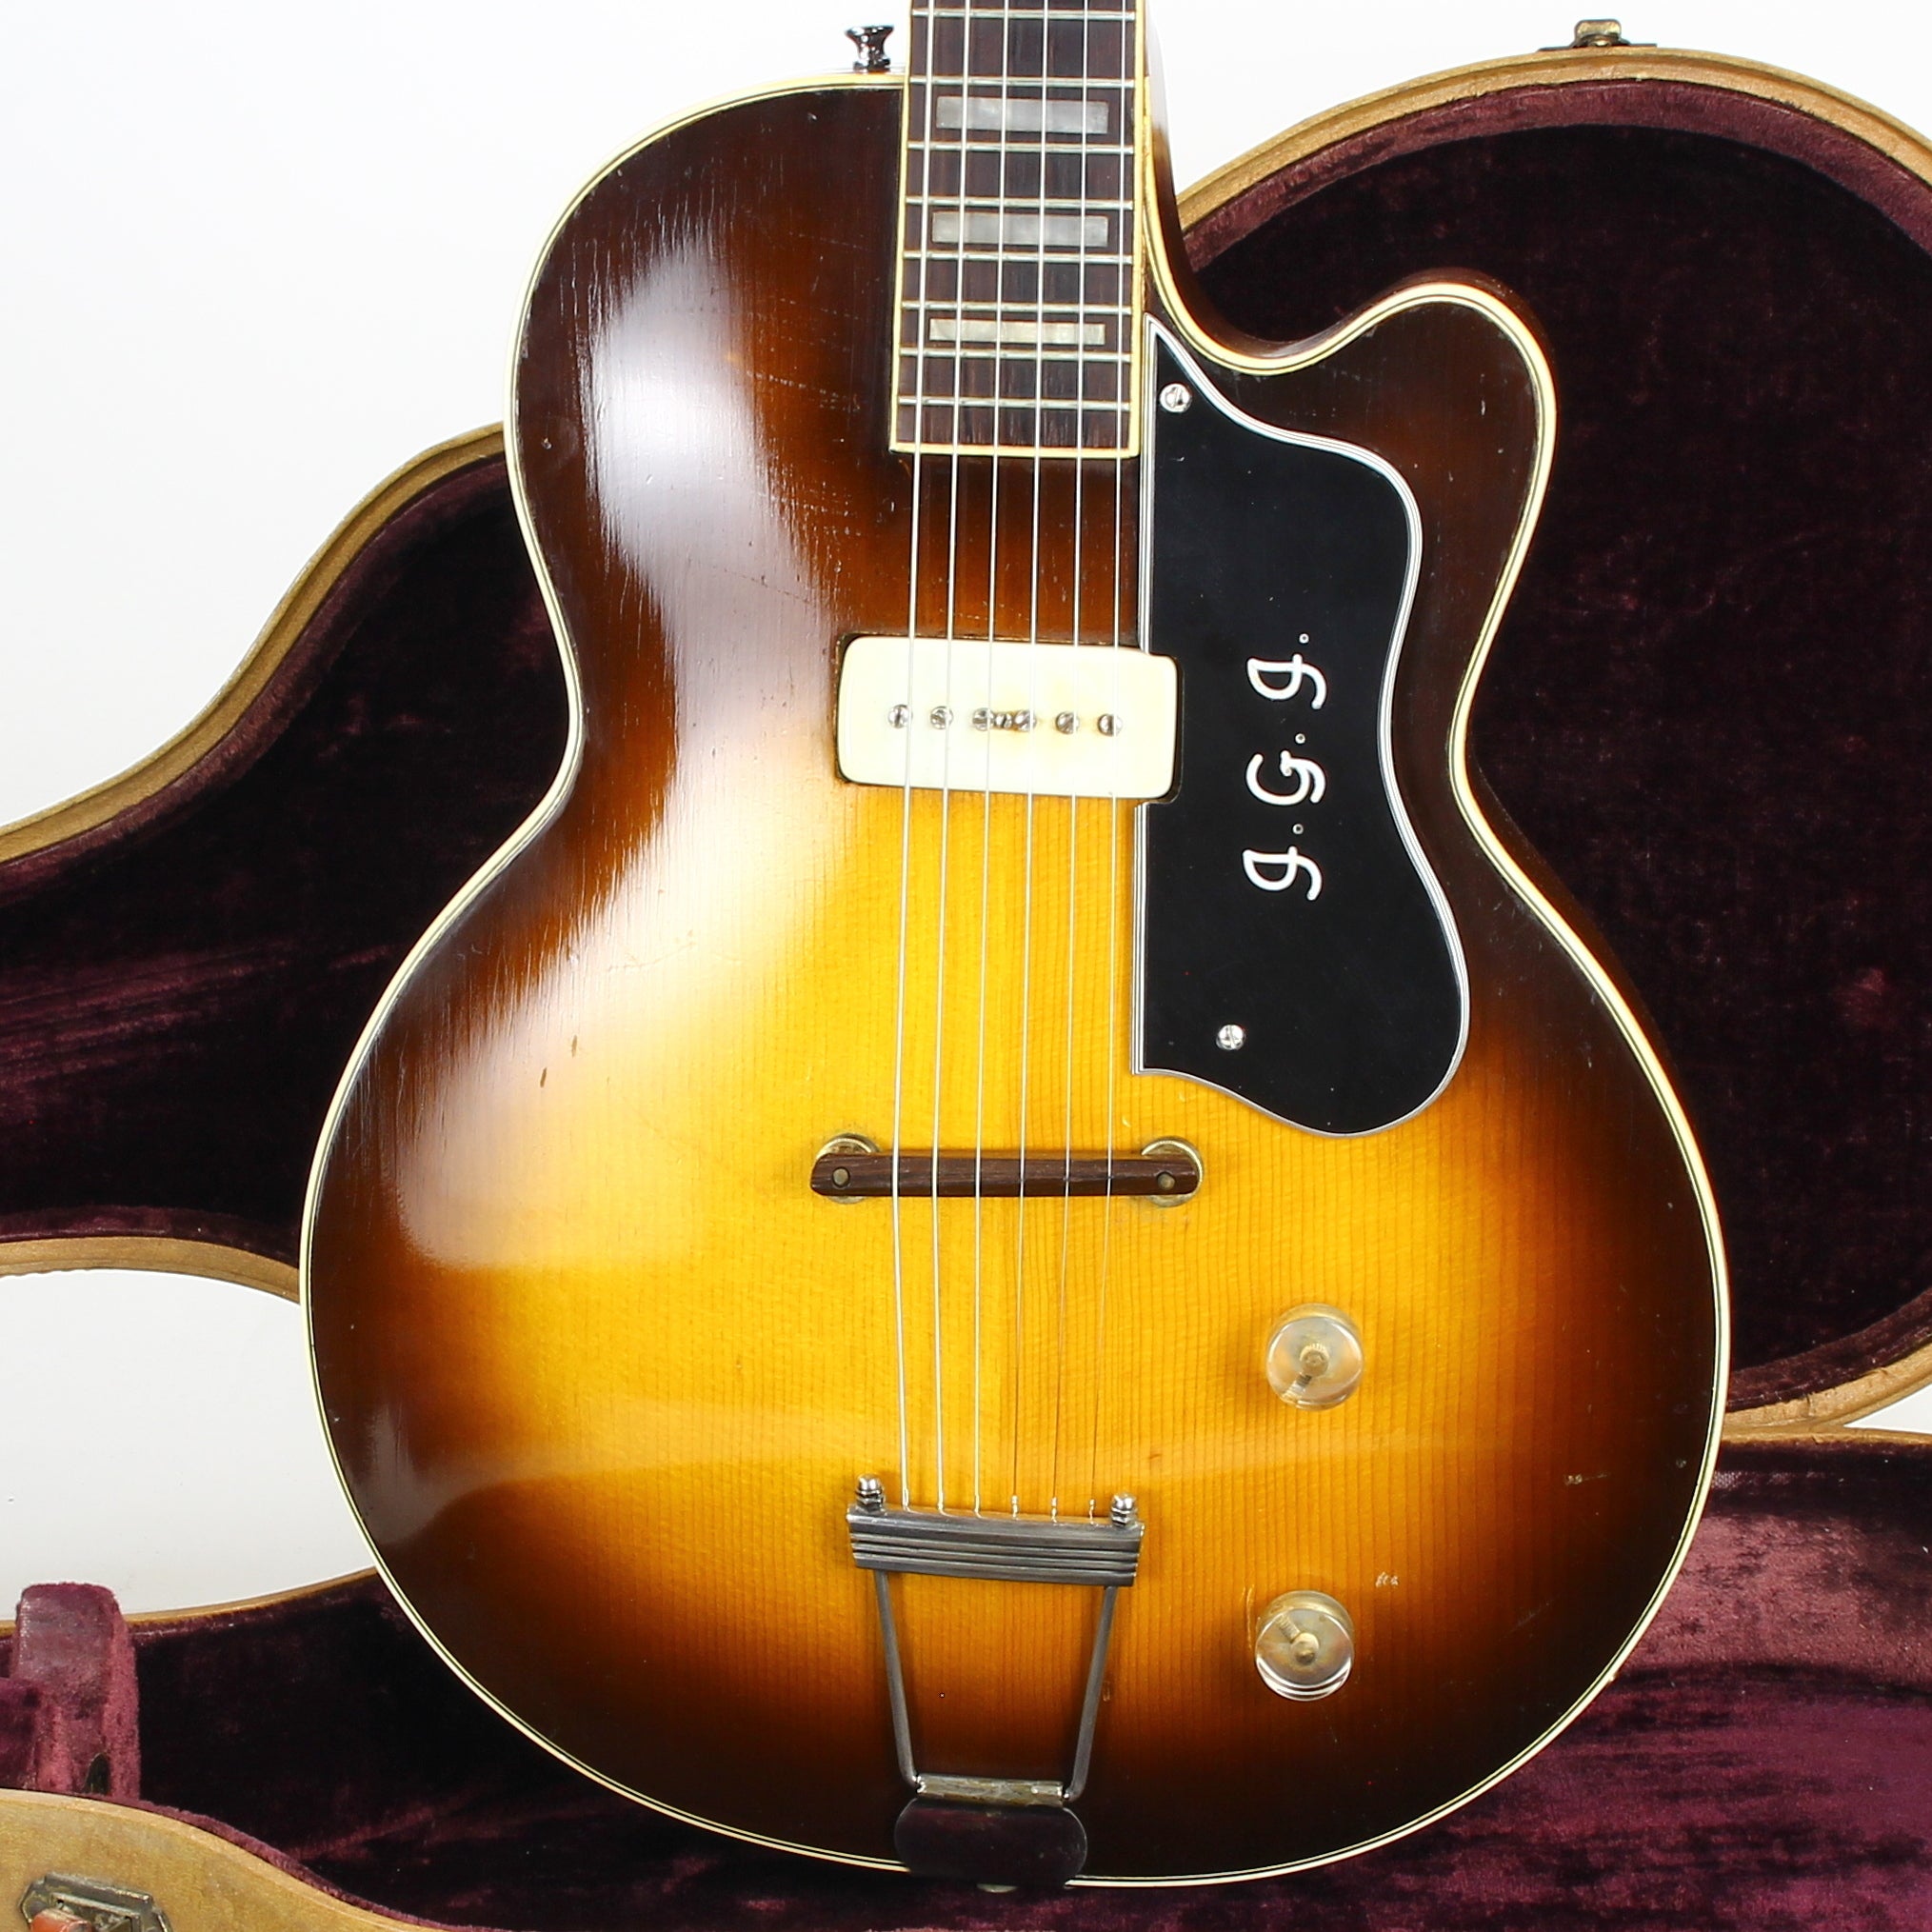 EXTREMELY RARE! 1956 Guild M-75 Aristocrat Custom Order ONE Single Franz Pickup - 1950's Les Paul Competitor!